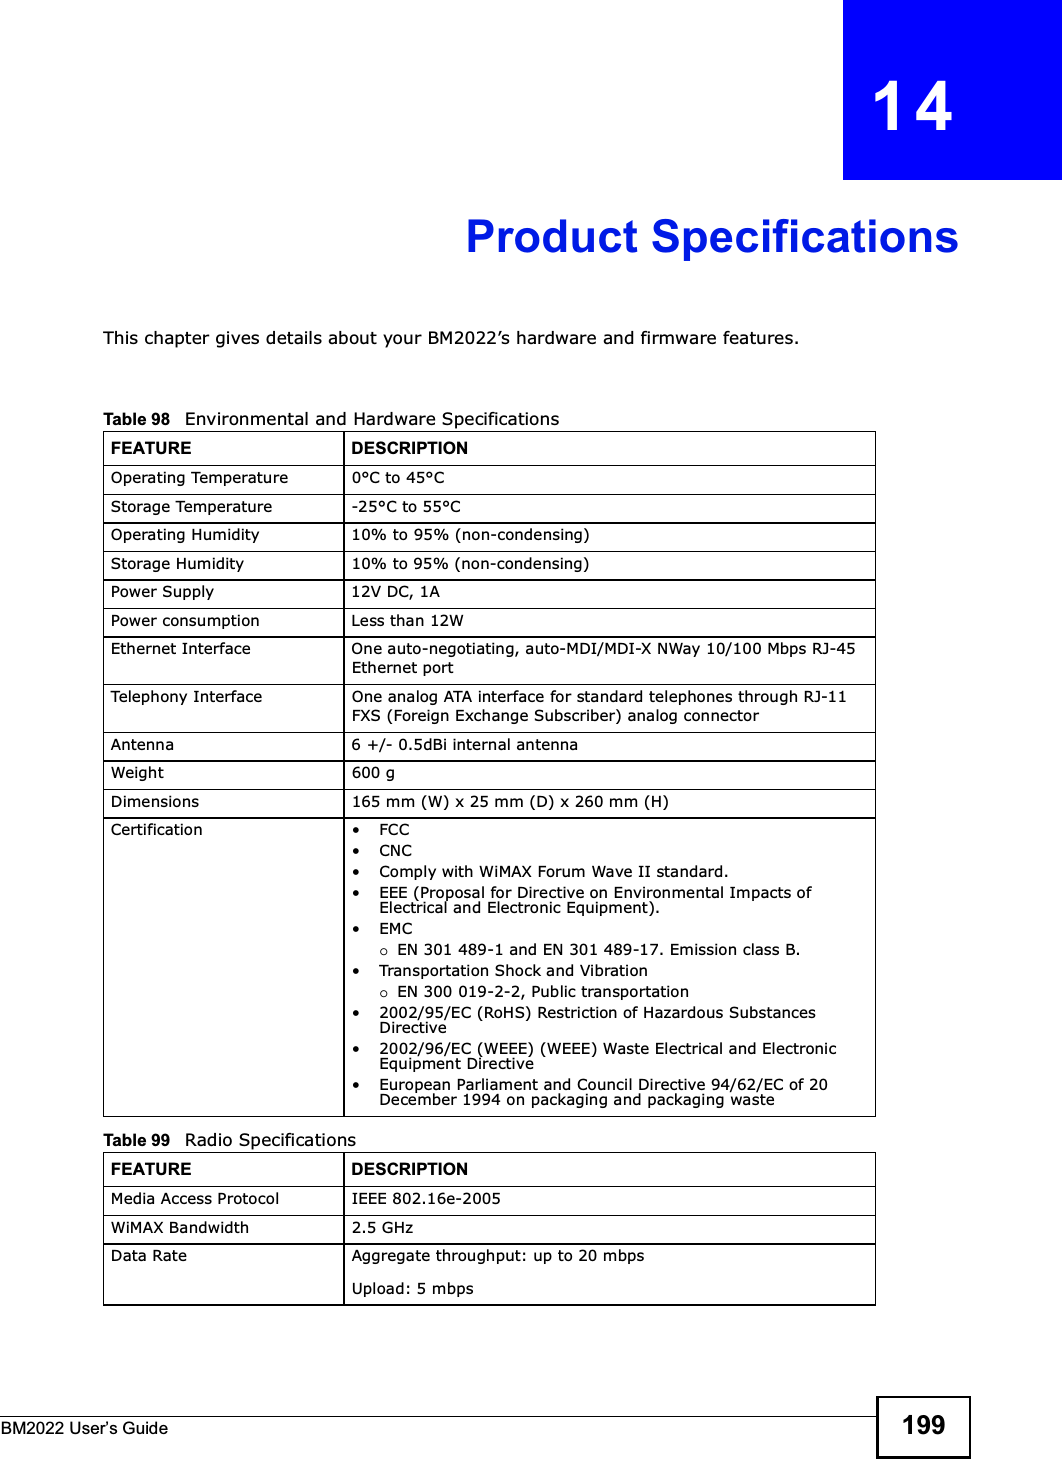 BM2022 Users Guide 199CHAPTER   14Product SpecificationsThis chapter gives details about your BM2022s hardware and firmware features.                     Table 98   Environmental and Hardware SpecificationsFEATURE DESCRIPTIONOperating Temperature 0C to 45CStorage Temperature -25C to 55COperating Humidity 10% to 95% (non-condensing)Storage Humidity  10% to 95% (non-condensing)Power Supply 12V DC, 1APower consumption Less than 12WEthernet Interface One auto-negotiating, auto-MDI/MDI-X NWay 10/100 Mbps RJ-45 Ethernet portTelephony Interface One analog ATA interface for standard telephones through RJ-11 FXS (Foreign Exchange Subscriber) analog connectorAntenna 6 +/- 0.5dBi internal antennaWeight 600 gDimensions 165 mm (W) x 25 mm (D) x 260 mm (H)Certification FCCCNC Comply with WiMAX Forum Wave II standard. EEE (Proposal for Directive on Environmental Impacts of Electrical and Electronic Equipment).EMCo EN 301 489-1 and EN 301 489-17. Emission class B. Transportation Shock and Vibrationo EN 300 019-2-2, Public transportation 2002/95/EC (RoHS) Restriction of Hazardous Substances Directive 2002/96/EC (WEEE) (WEEE) Waste Electrical and Electronic Equipment Directive European Parliament and Council Directive 94/62/EC of 20 December 1994 on packaging and packaging wasteTable 99   Radio SpecificationsFEATURE DESCRIPTIONMedia Access Protocol IEEE 802.16e-2005WiMAX Bandwidth 2.5 GHzData Rate Aggregate throughput: up to 20 mbpsUpload: 5 mbps